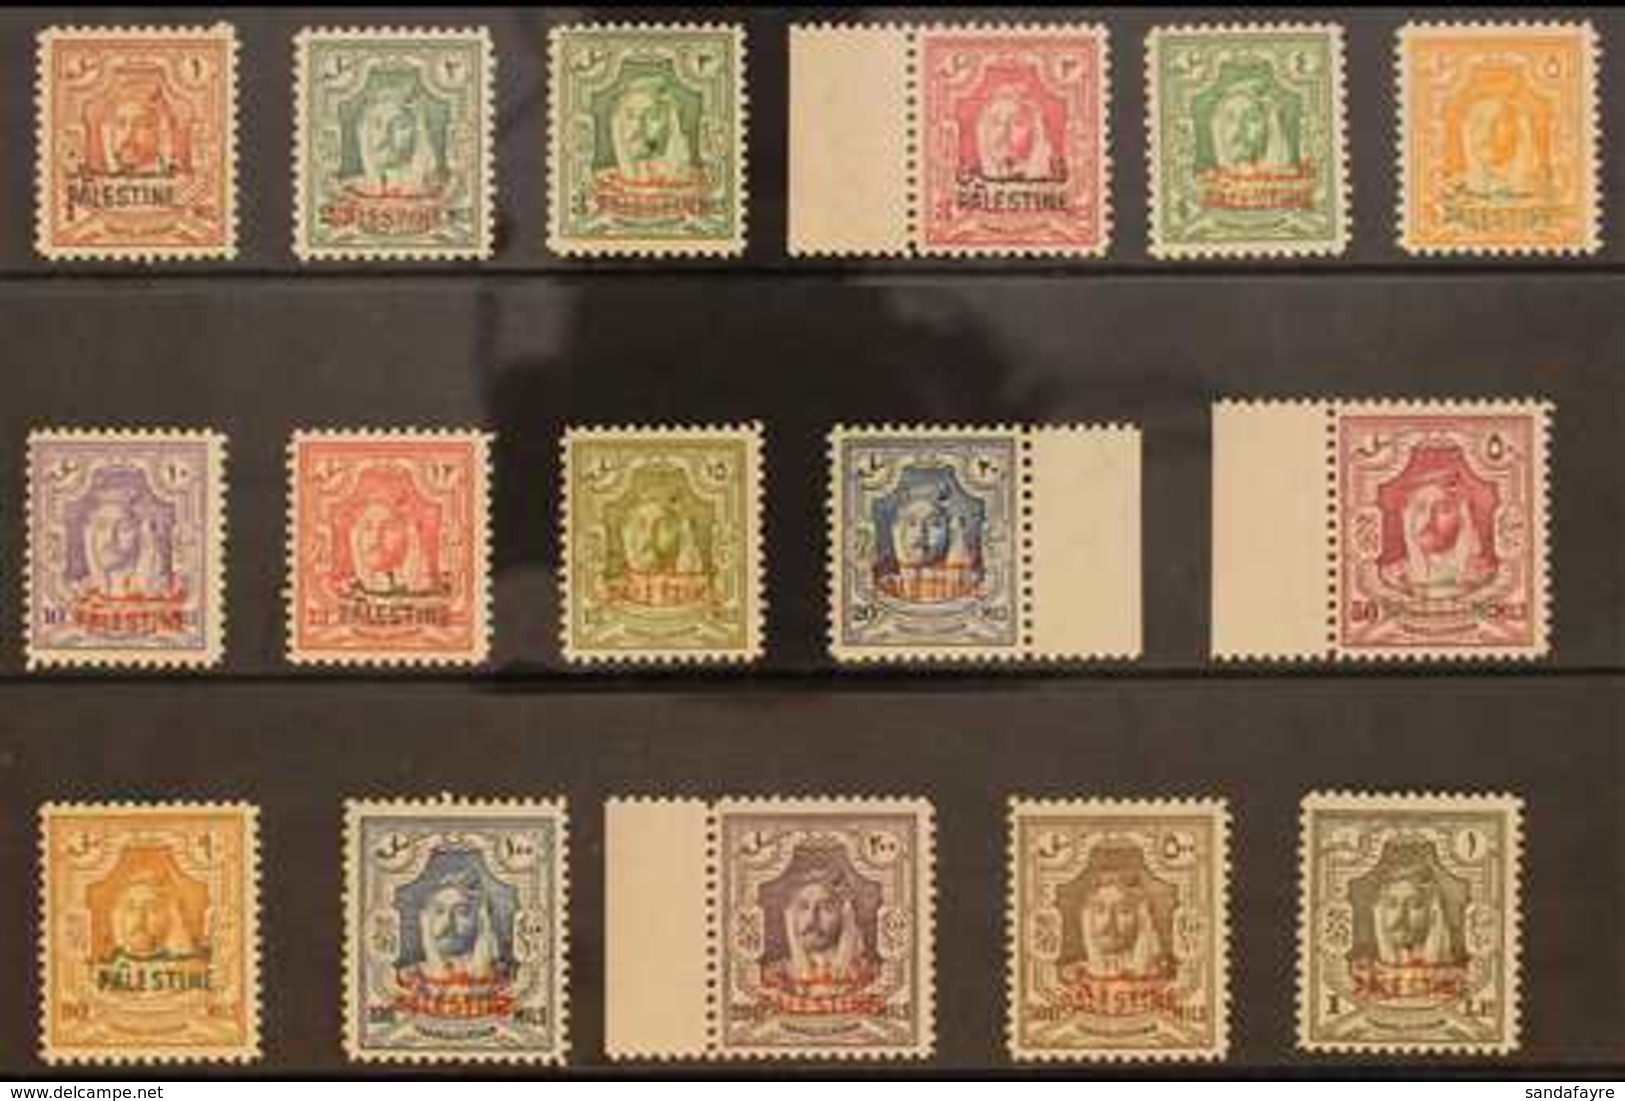 OCCUPATION OF PALESTINE 1948 Jordan Stamps Opt'd "PALESTINE", SG P1/16, Very Fine, Lightly Hinged Mint (16 Stamps) For M - Giordania